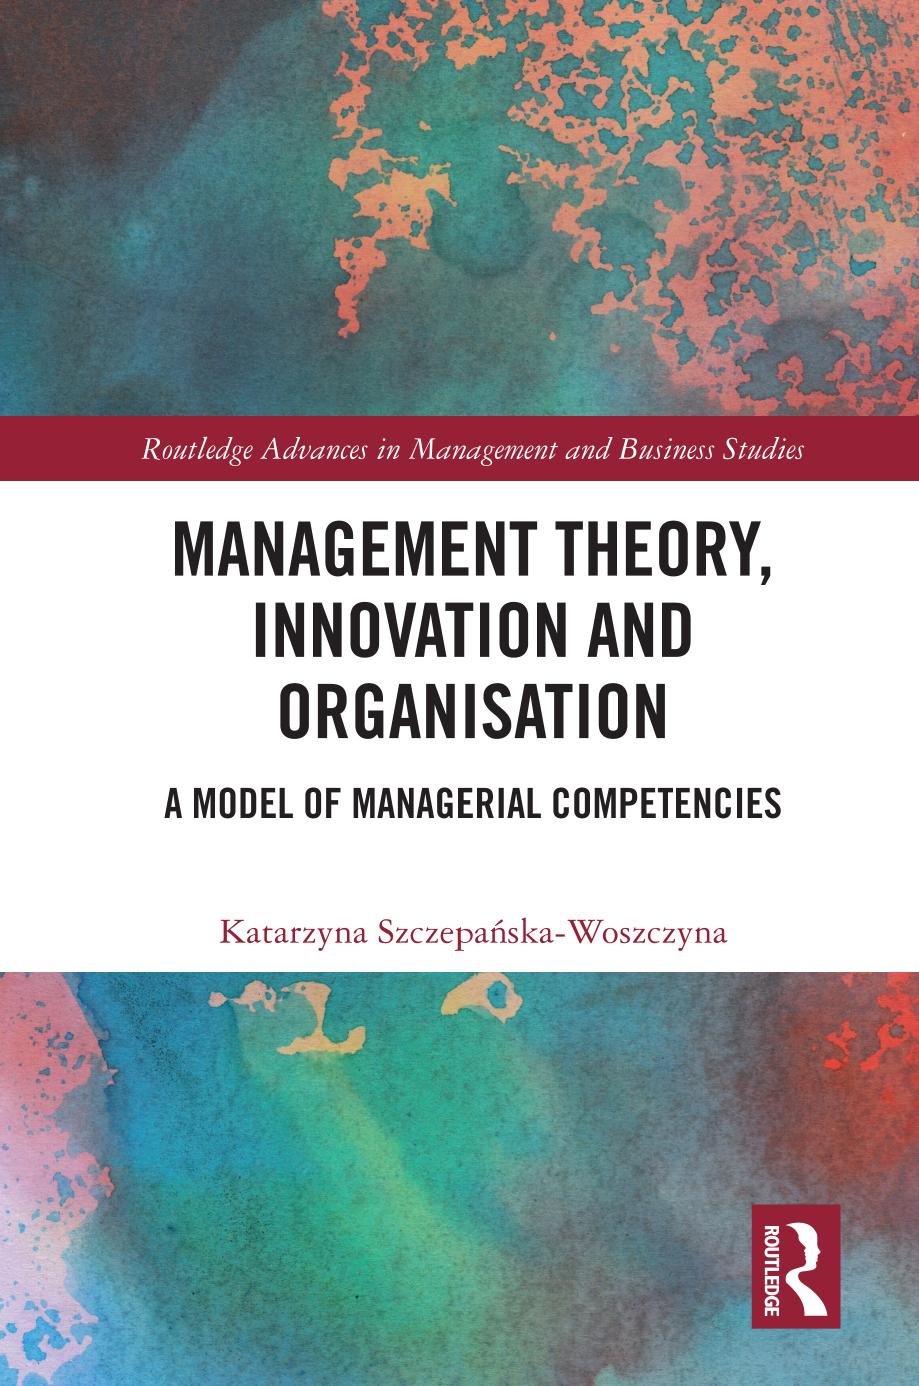 Management Theory, Innovation and Organisation; A Model of Managerial Competencies